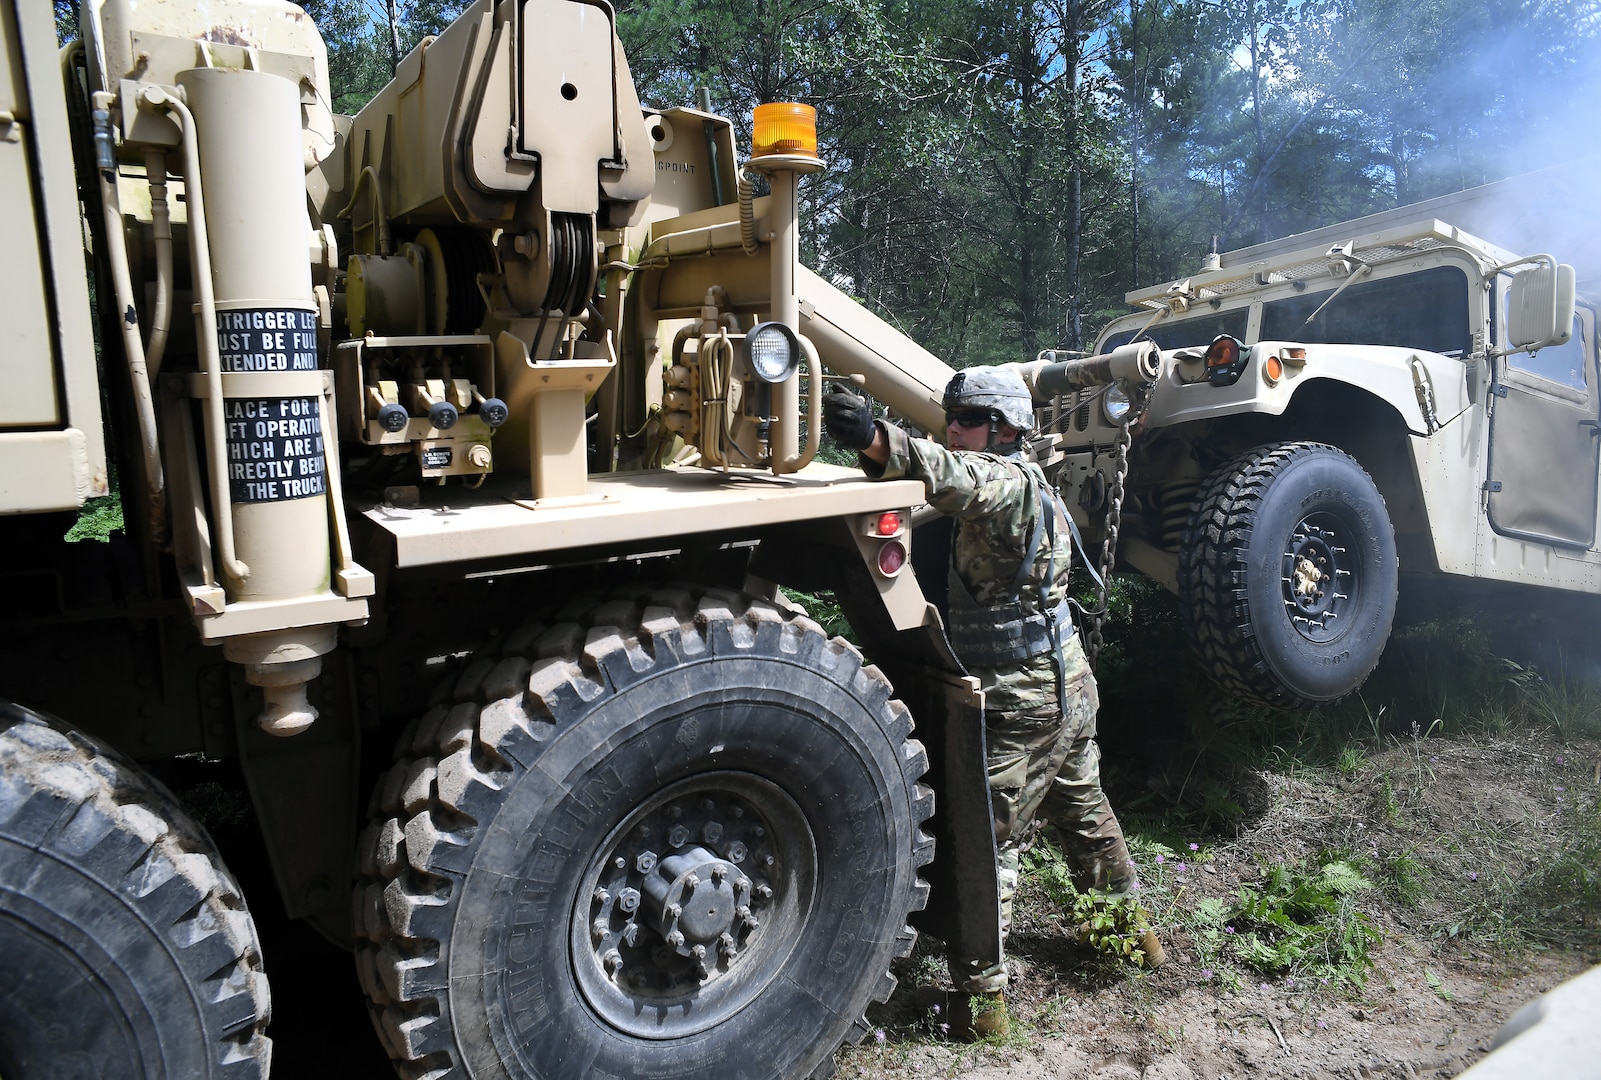 Spc. Darrin Hilts, a wheeled vehicle mechanic with the Michigan Army National Guard's 1073rd Maintenance Company,  works the hydraulics of an M984 HEMTT wrecker while preparing to tow a Humvee as part of a training mission during exercise Northern Strike at Camp Grayling, Michigan, July 27, 2020.